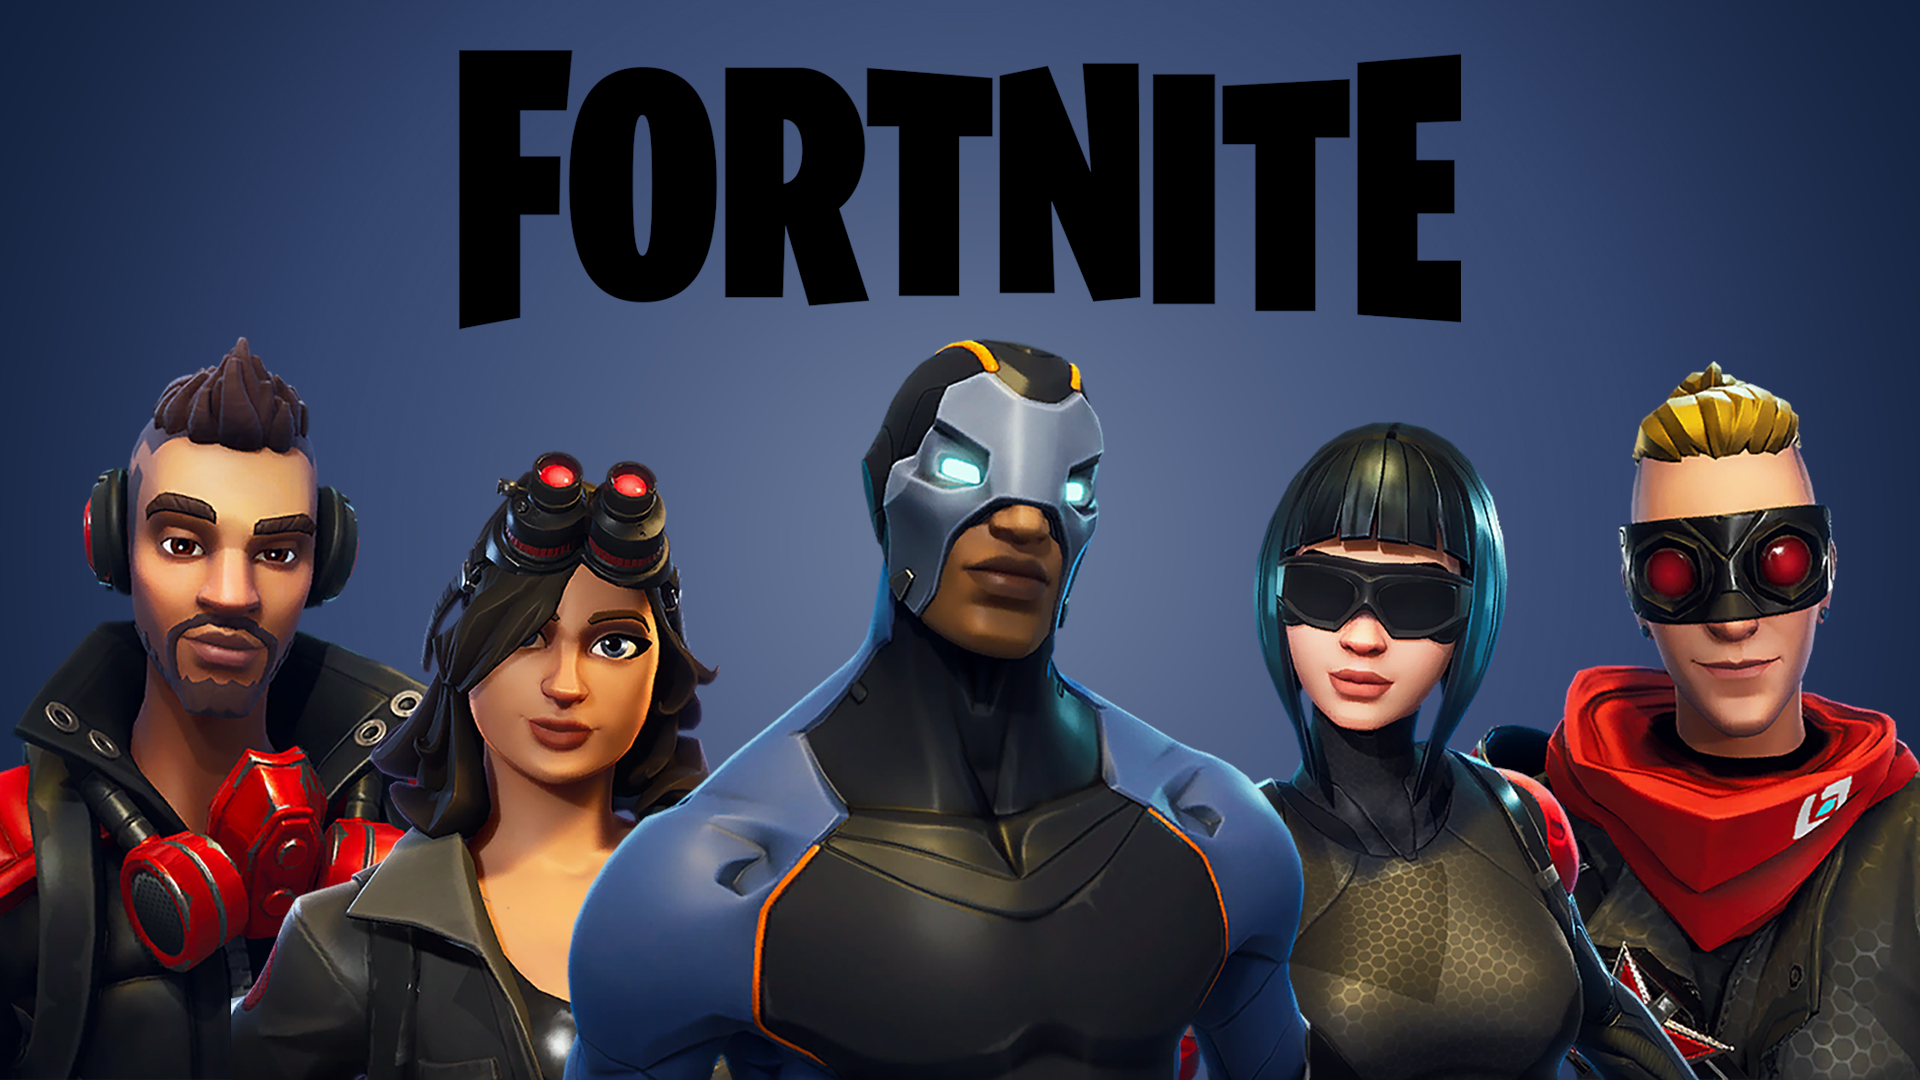 General 1920x1080 Fortnite Battle Royale PC gaming blue background video games